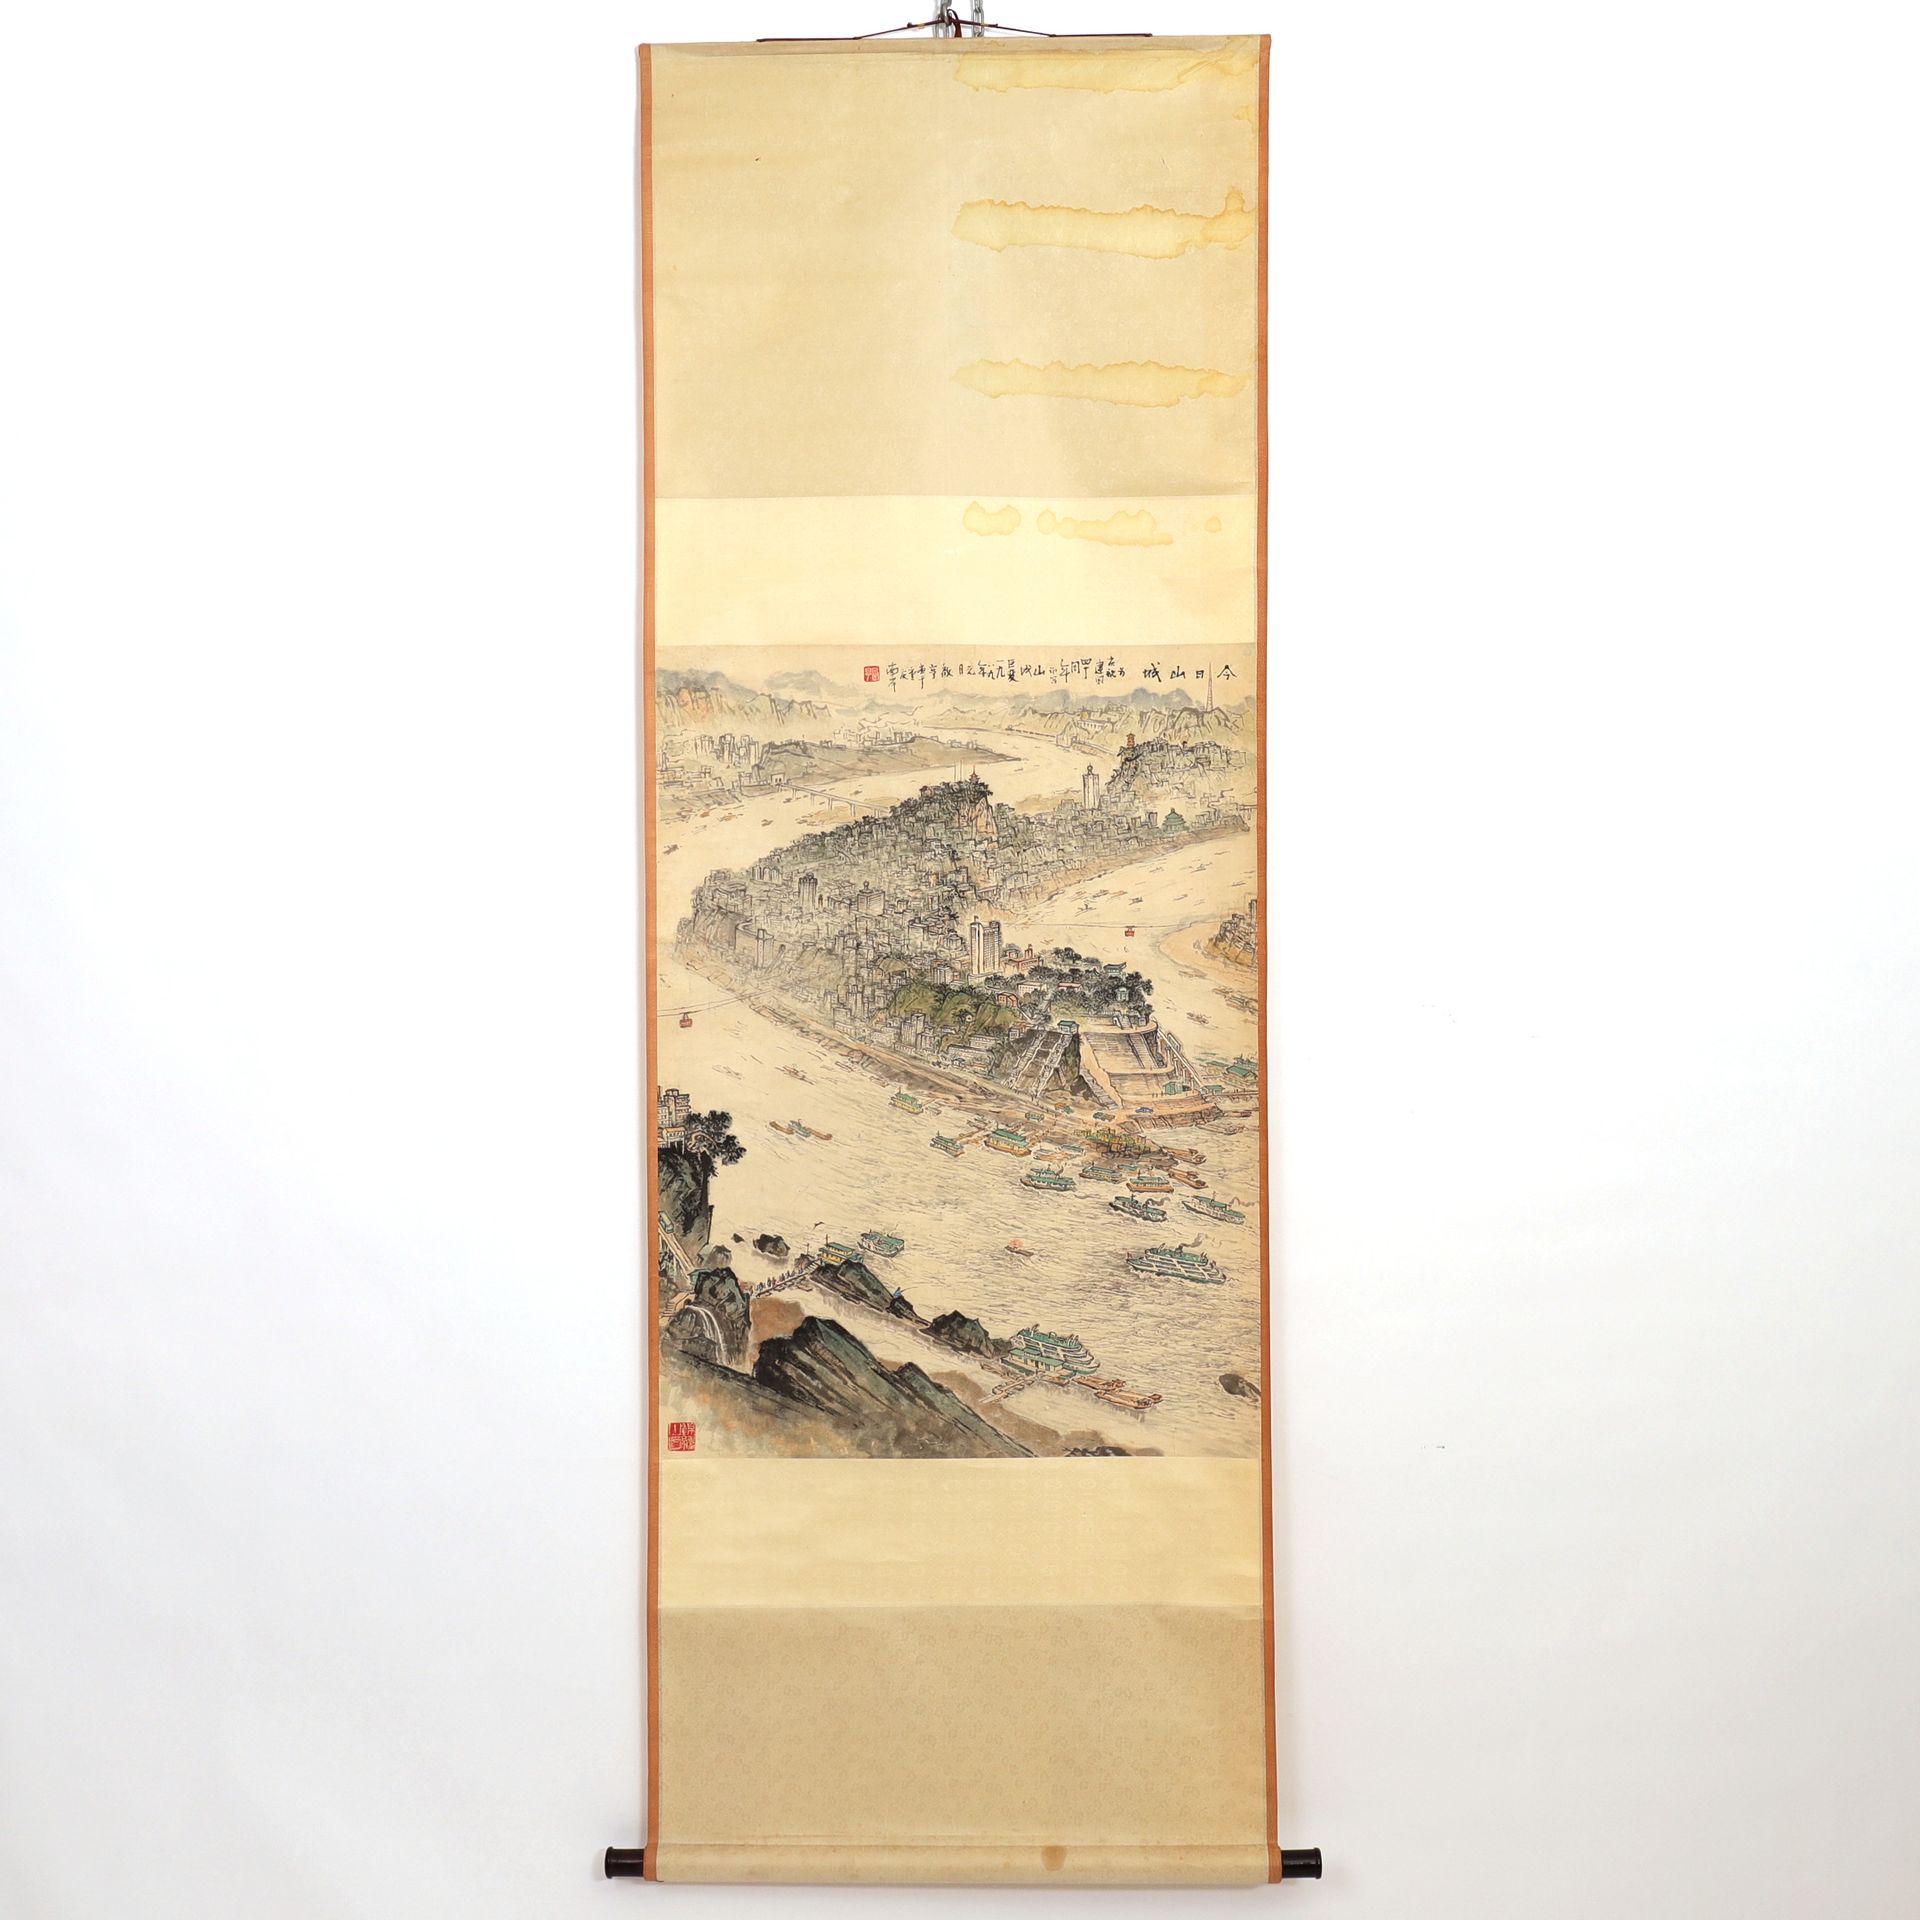 Null INK AND COLOUR SCROLL PAINTING ON PAPER

Representing the panoramic view of&hellip;